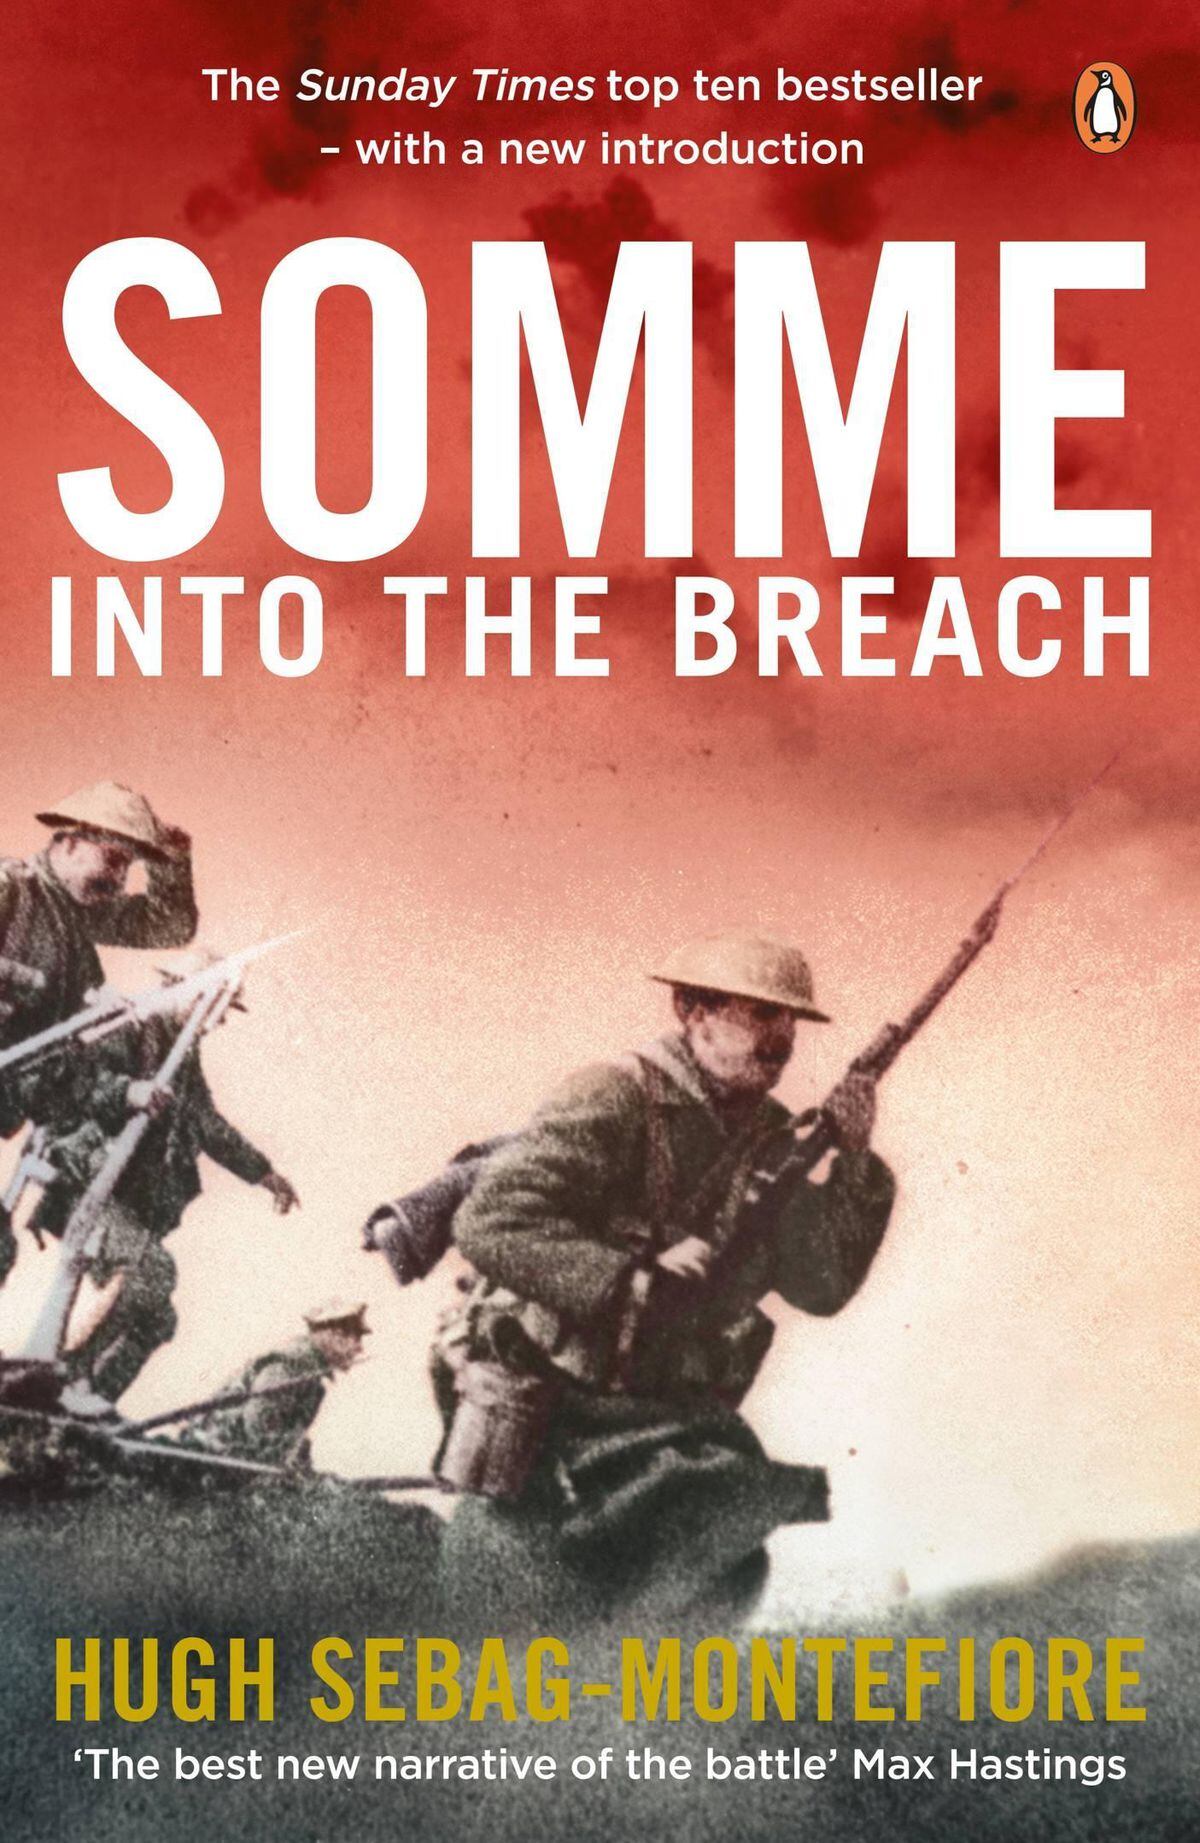 The Somme book cover